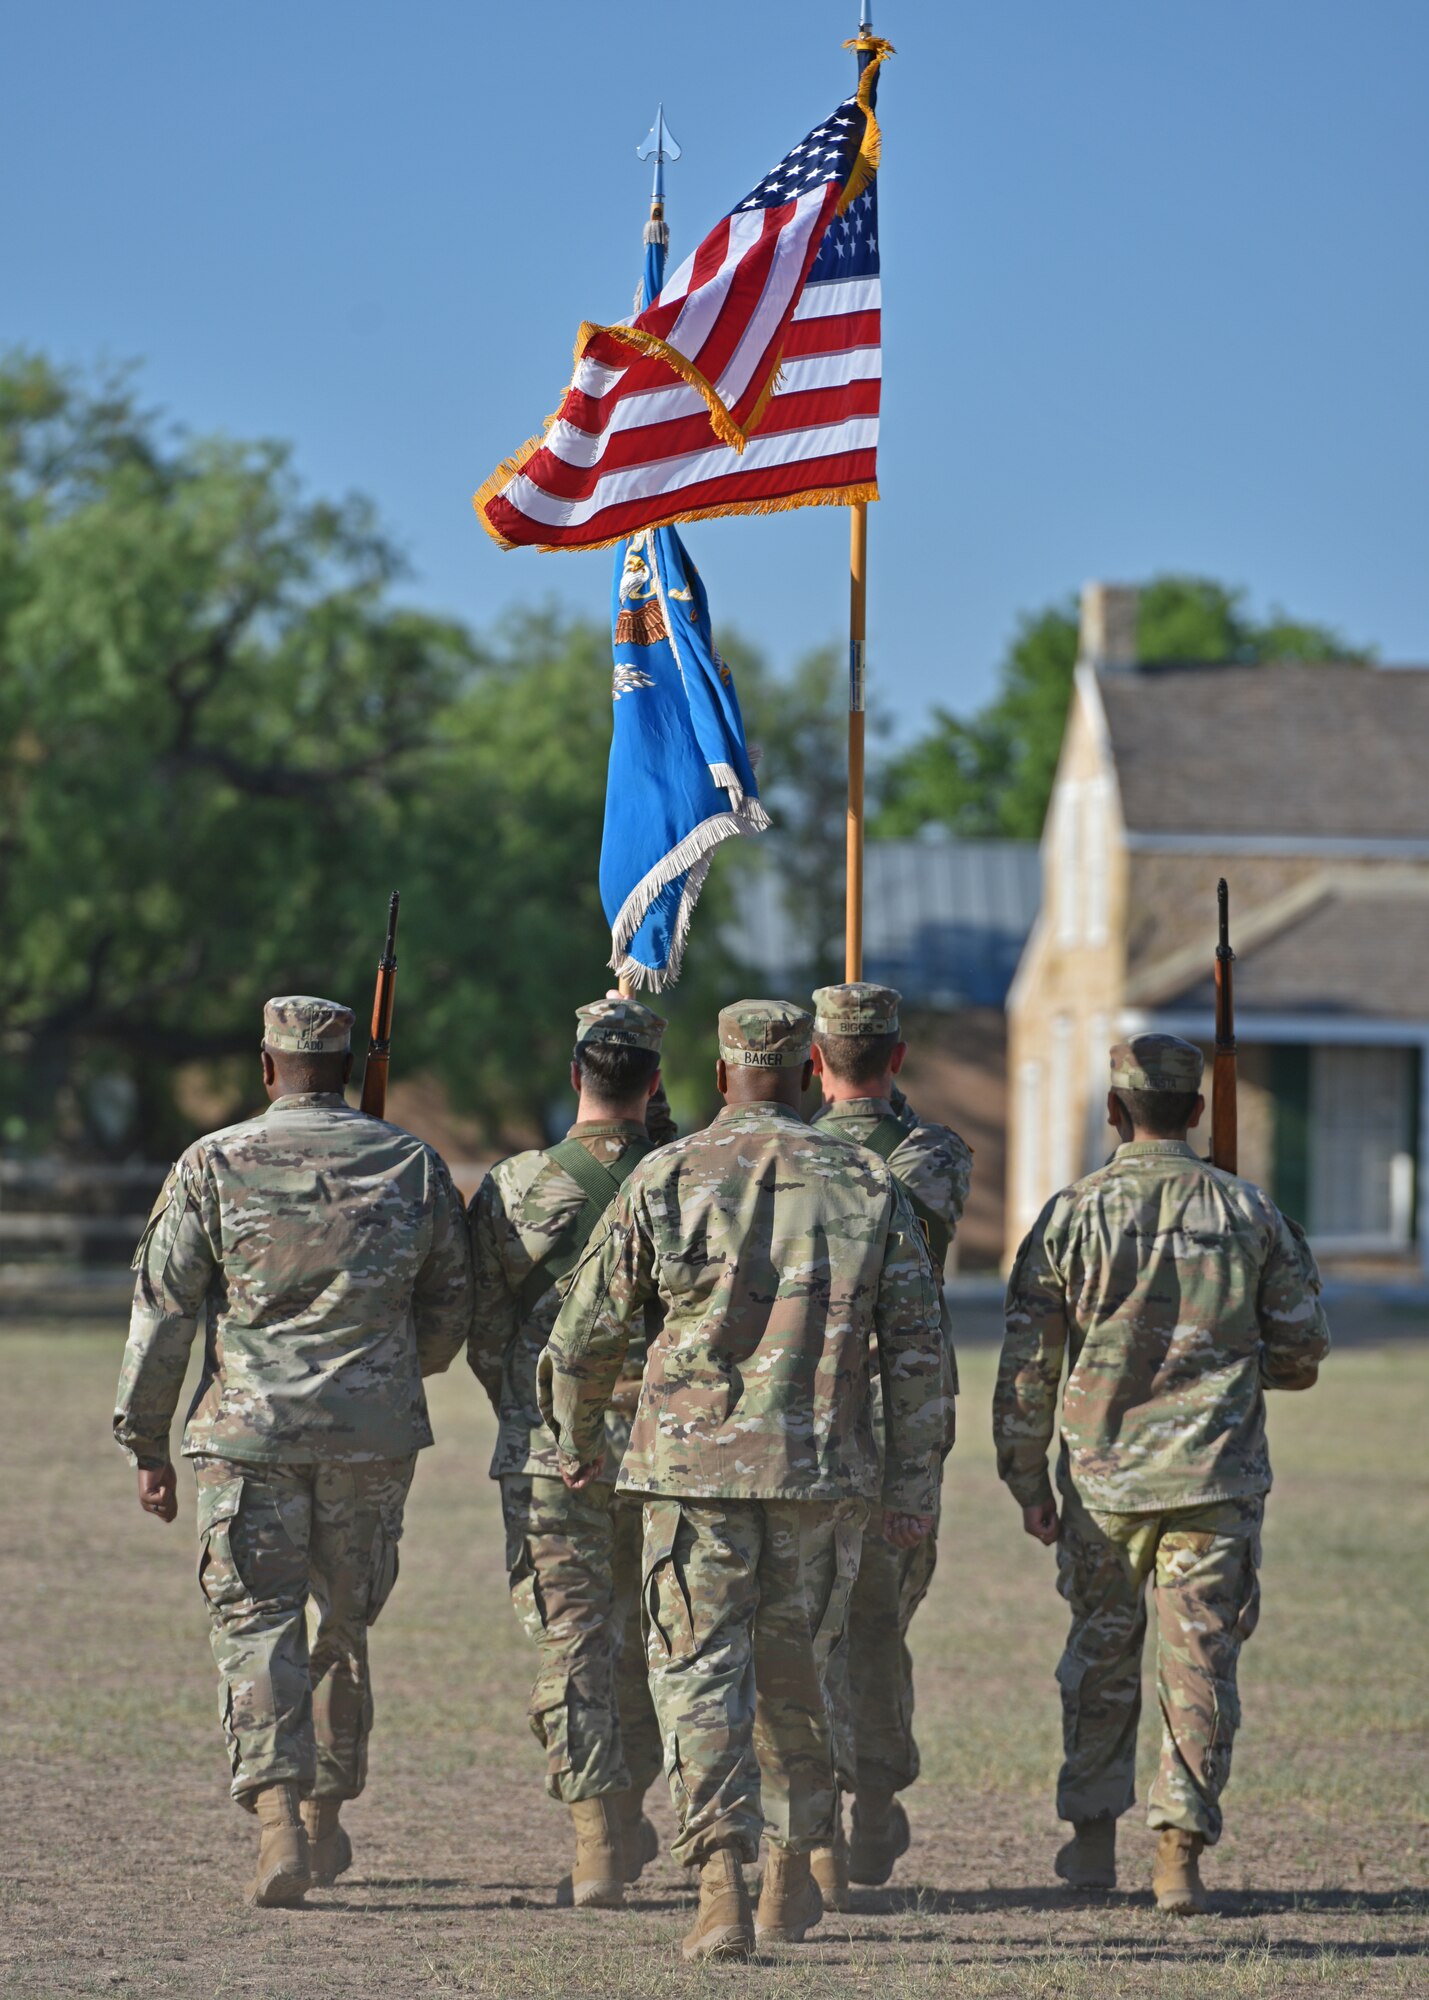 U.S. Army Command Sgt. Maj. Sudan Baker, 344th Military Intelligence Battalion command sergeant major, marches with the Army Color Guard during the 344th MI BN change of command ceremony at Fort Concho, San Angelo, Texas, June 21, 2022. The Army Color Guard is responsible for presenting the colors during the National Anthem. (U.S. Air Force photo by Senior Airman Ashley Thrash)